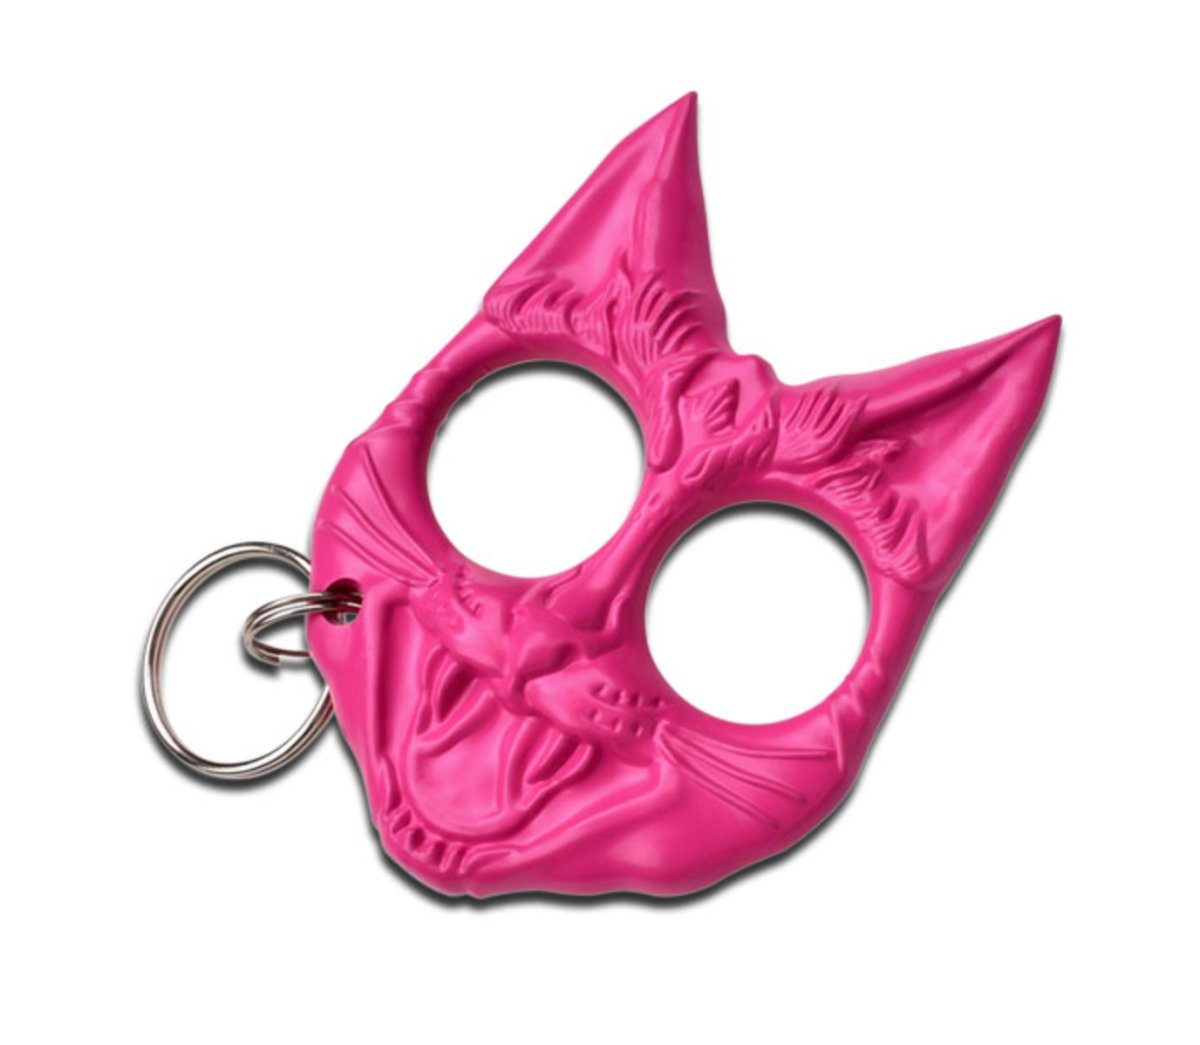 Keychain Kitty Knuckles - Blades USA at Uppercut Tactical